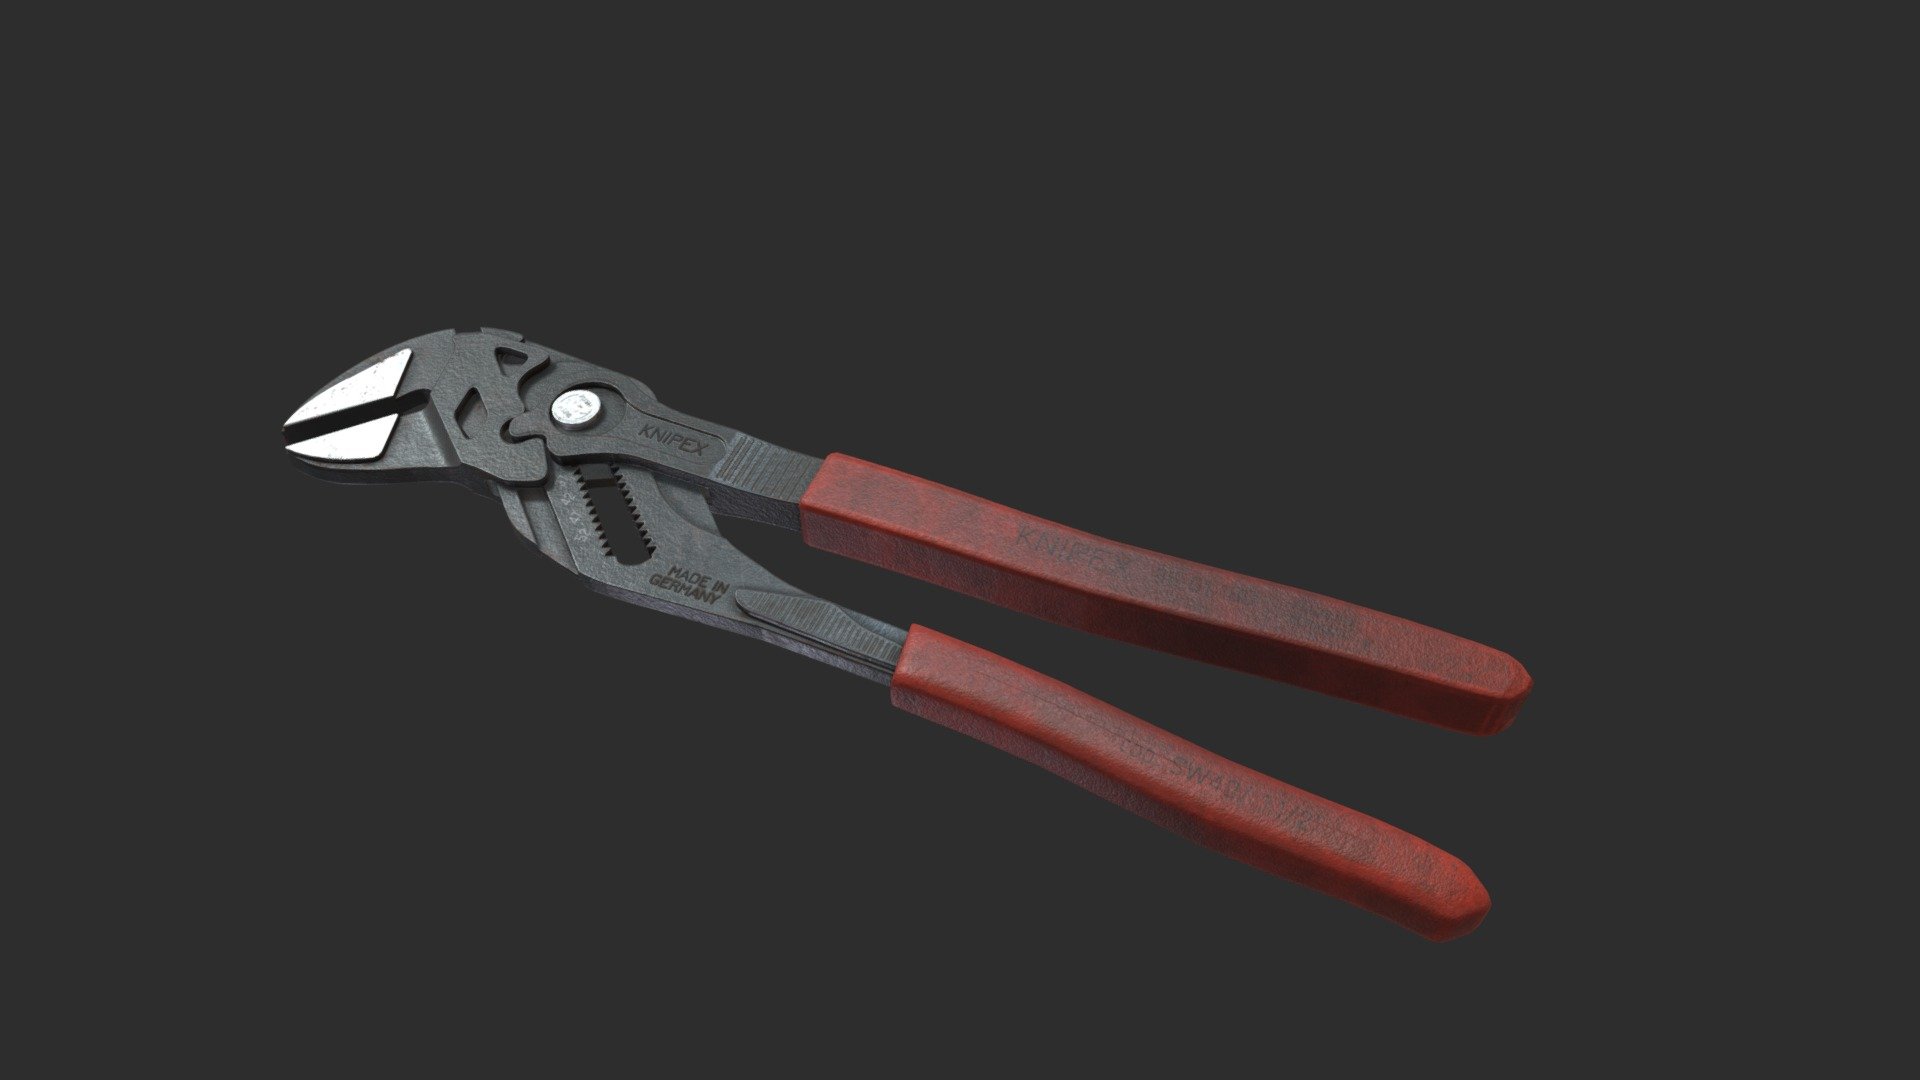 GAP Assigment: Knipex Wrench
KNIPEX 86 01 180 PLIERS WRENCH - GAP Assigment: Knipex Wrench - 3D model by YannisTH 3d model